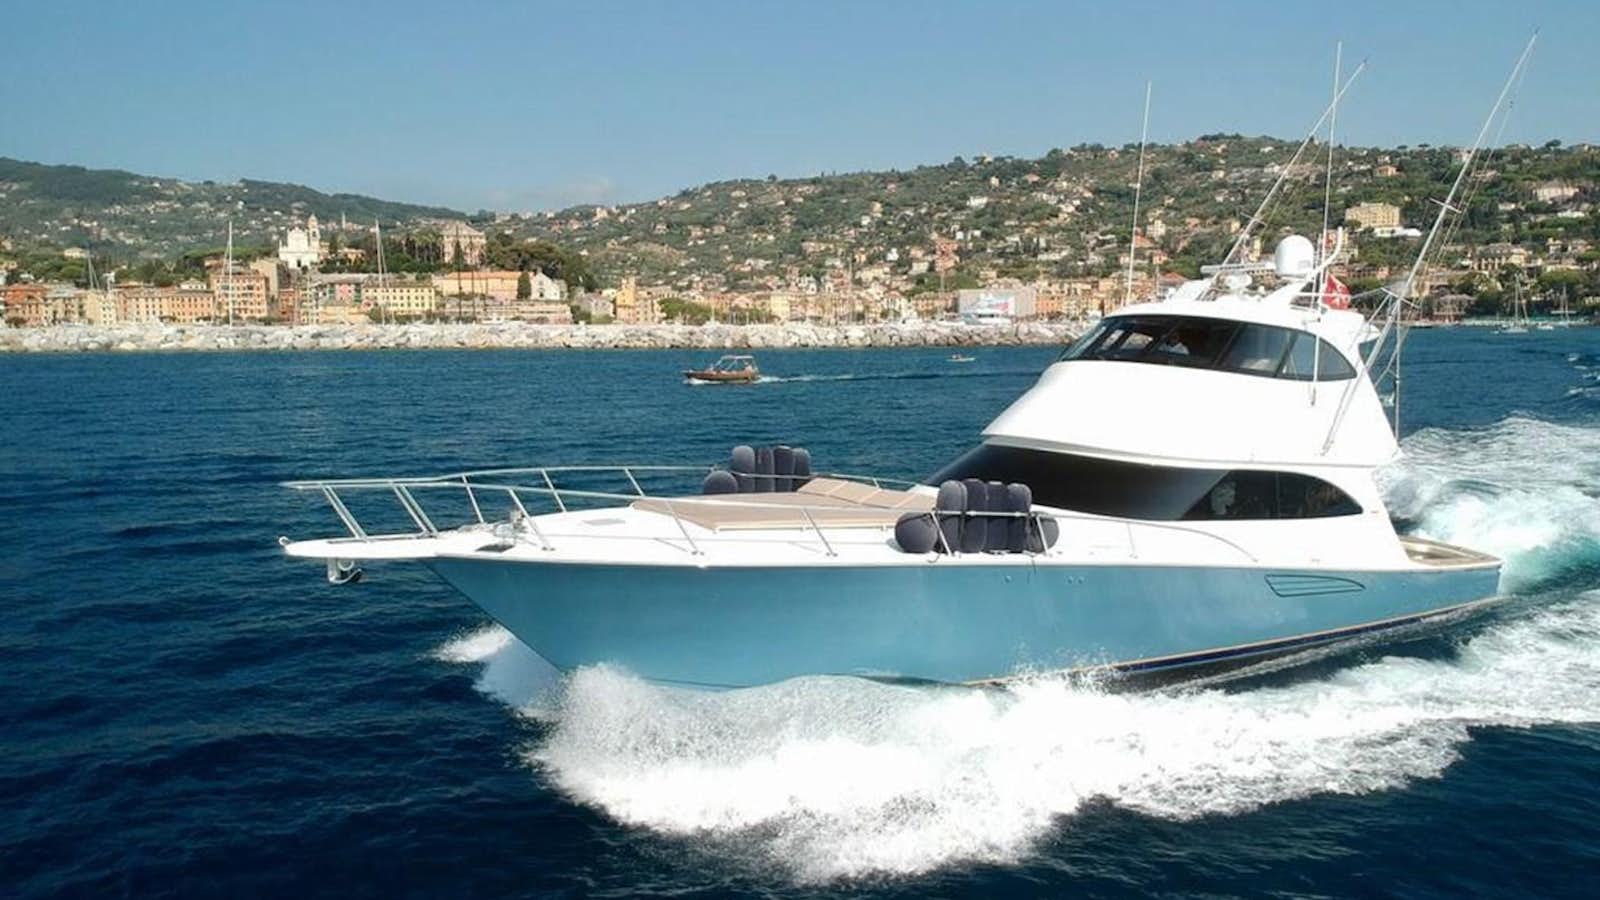 Tia
Yacht for Sale